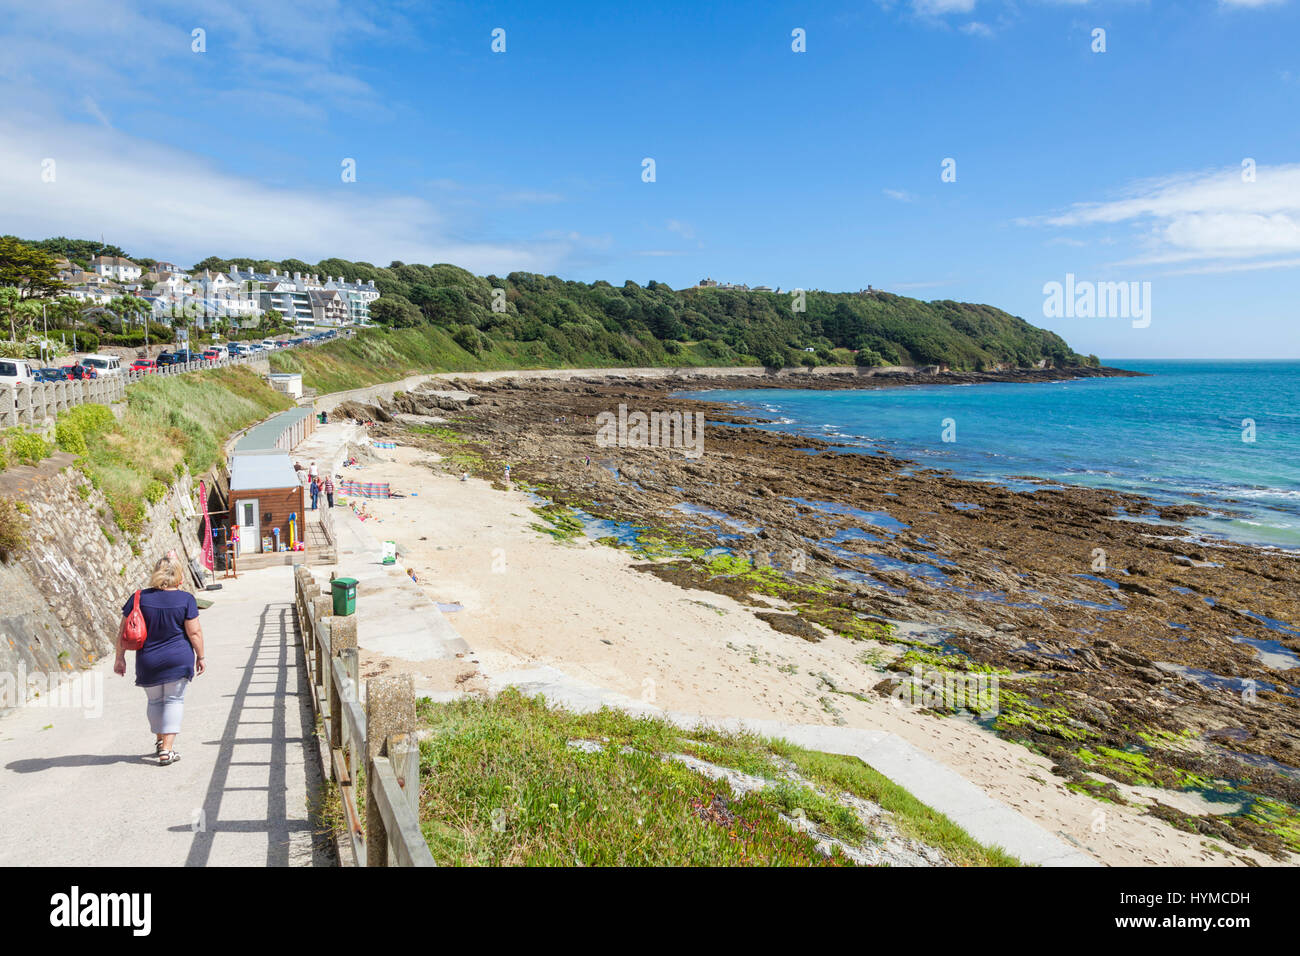 Falmouth cornwall Castle Beach a small sandy beach with food kiosk and rockpools Falmouth Cornwall west country england gb uk eu europe Stock Photo